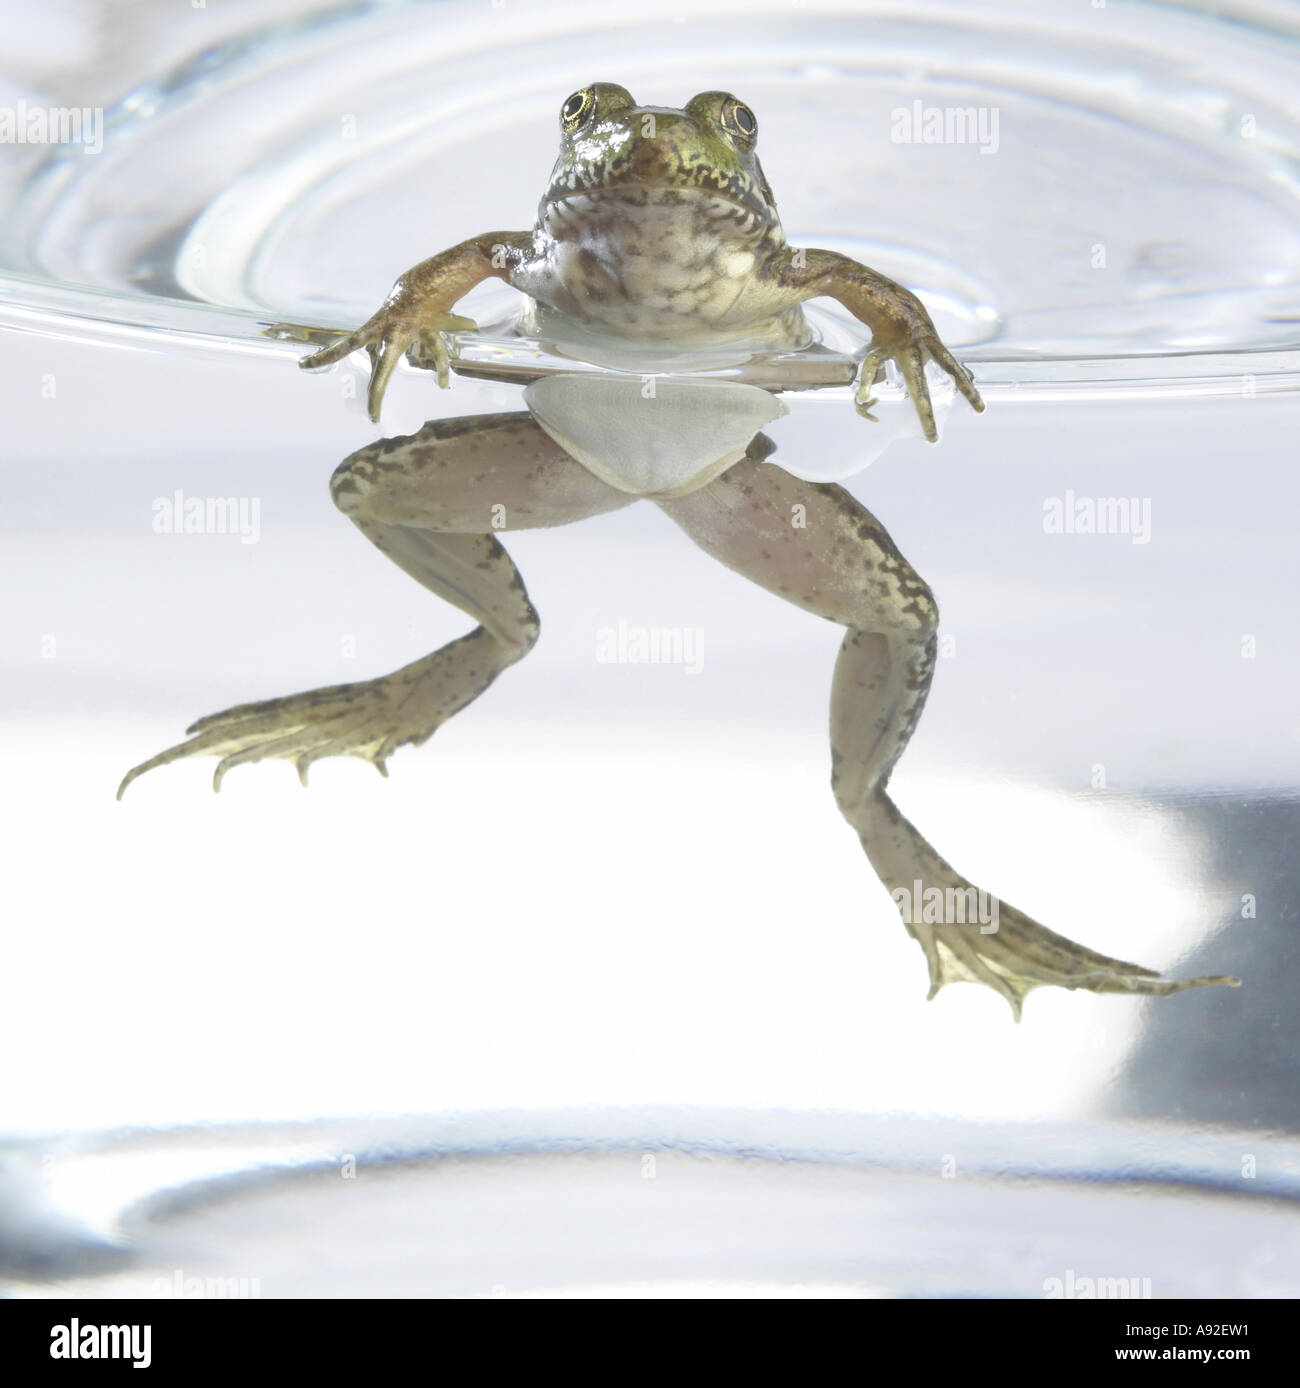 Close-up of a frog swimming in a water tank Stock Photo